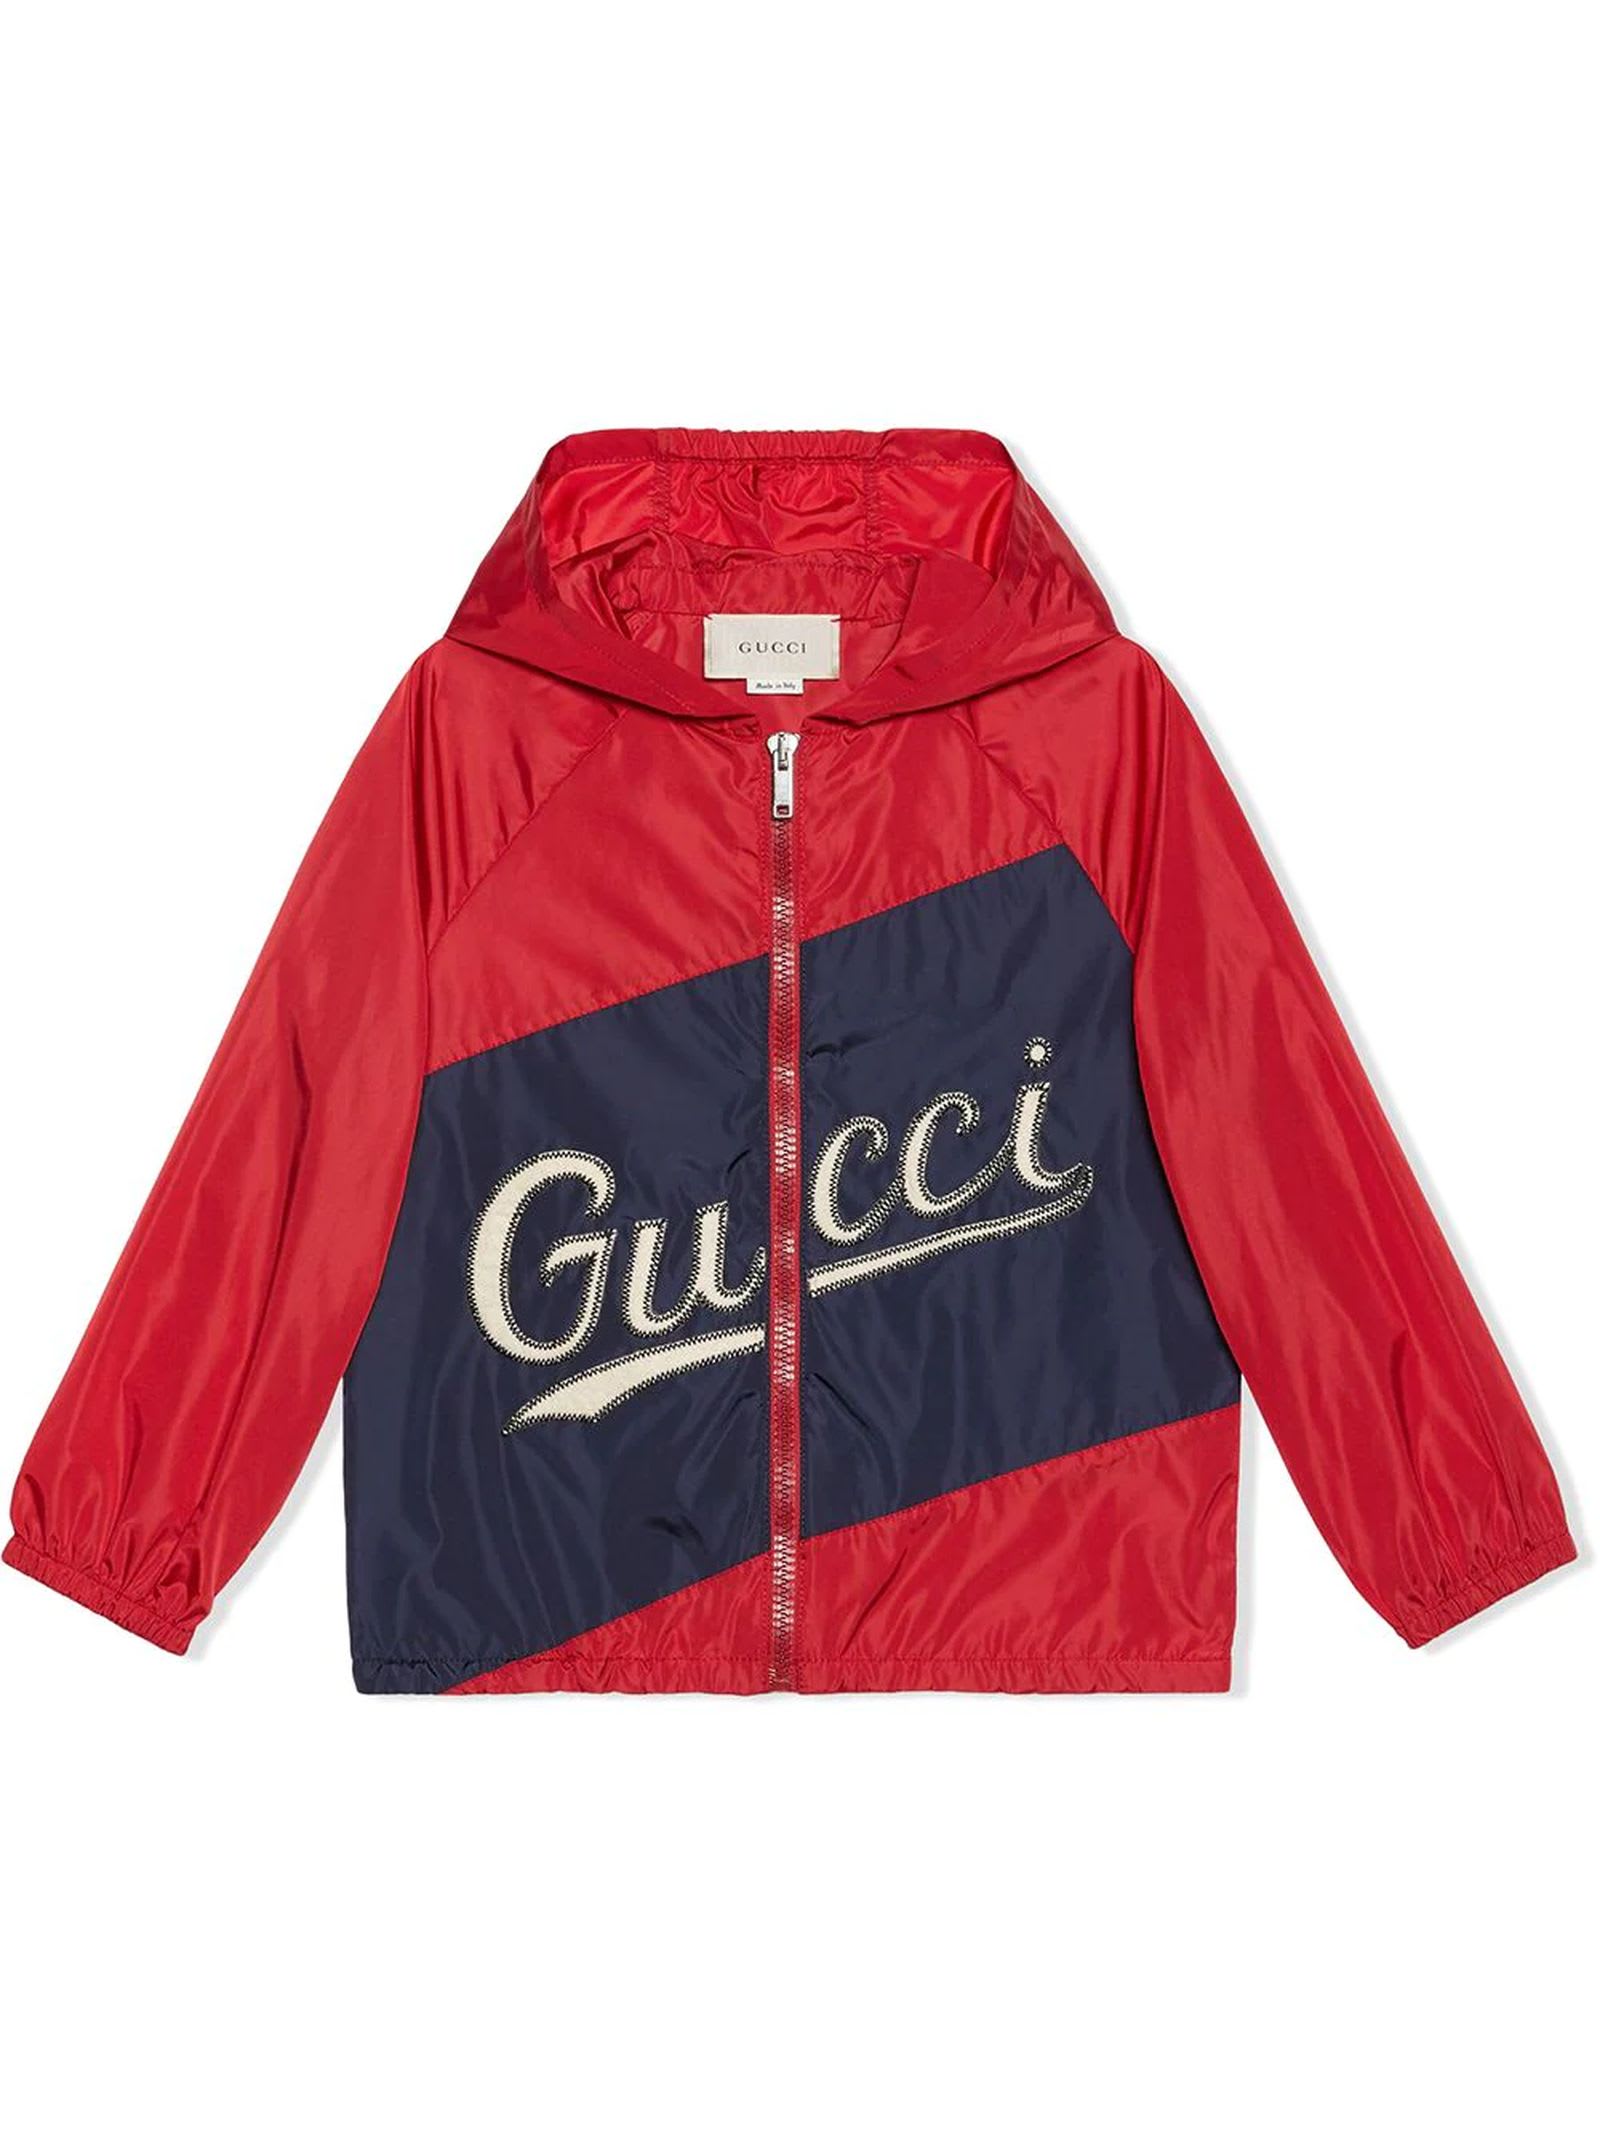 Gucci Nylon Jacket With Gucci Script | ALWAYS LIKE